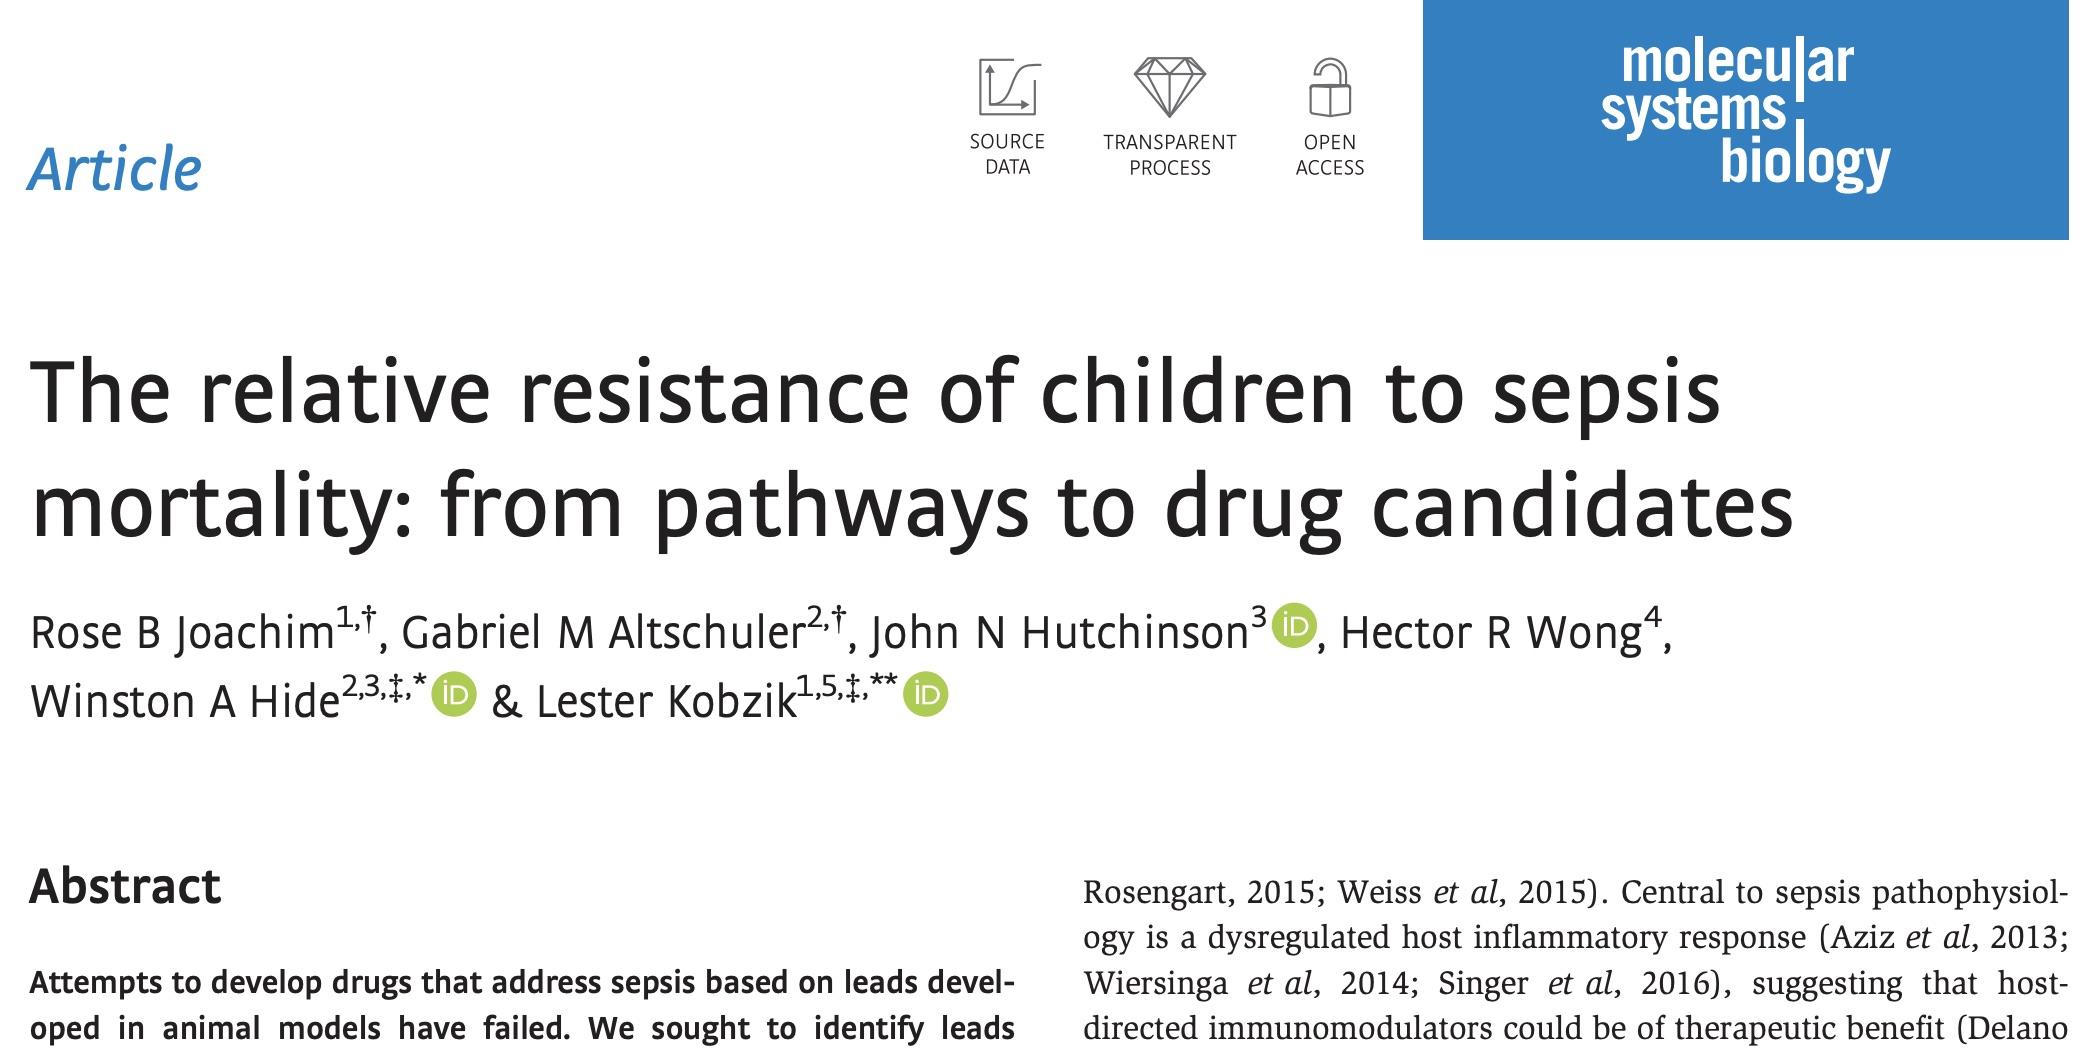 The relative resistance of children to sepsis mortality: from pathways to drug candidates